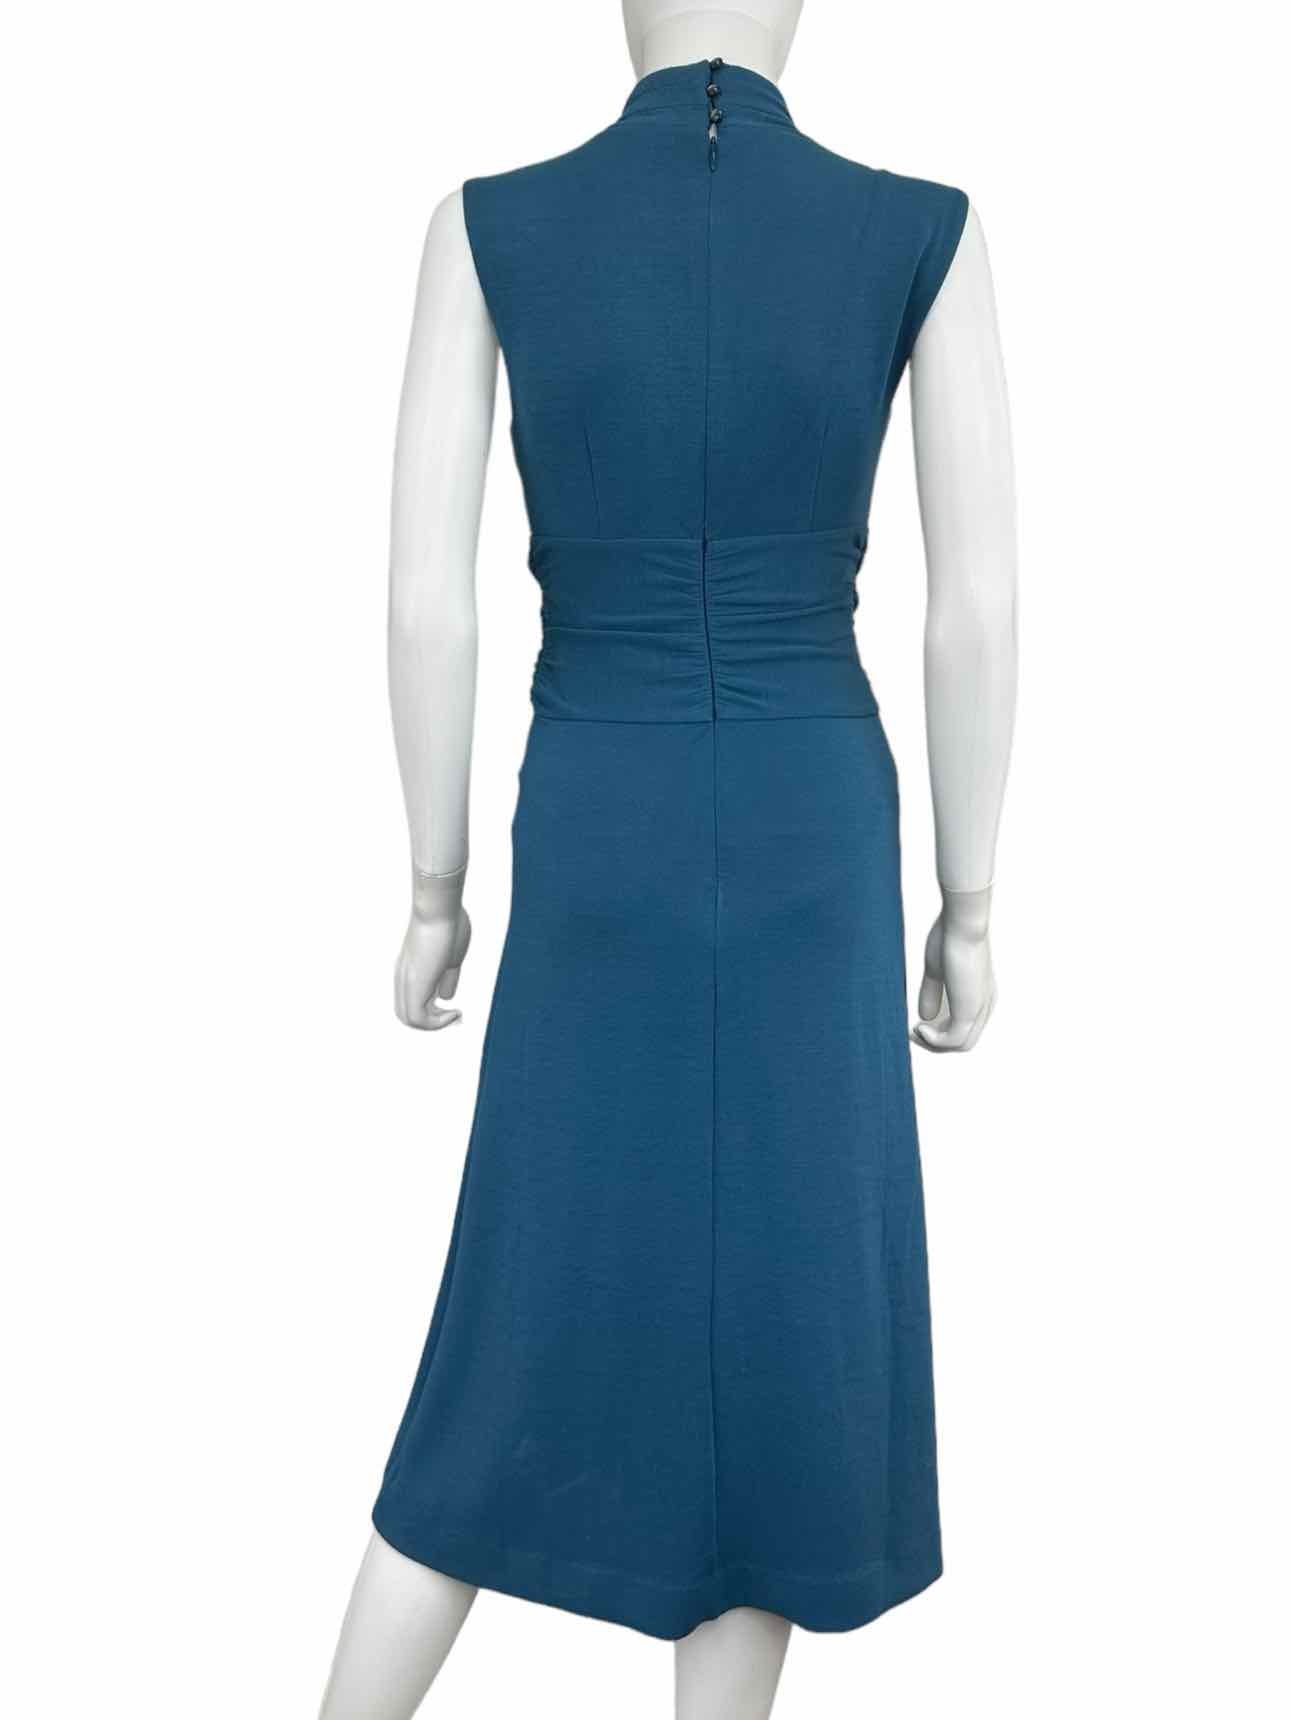 maeve by Anthropologie NWT Teal Midi Dress Size XS